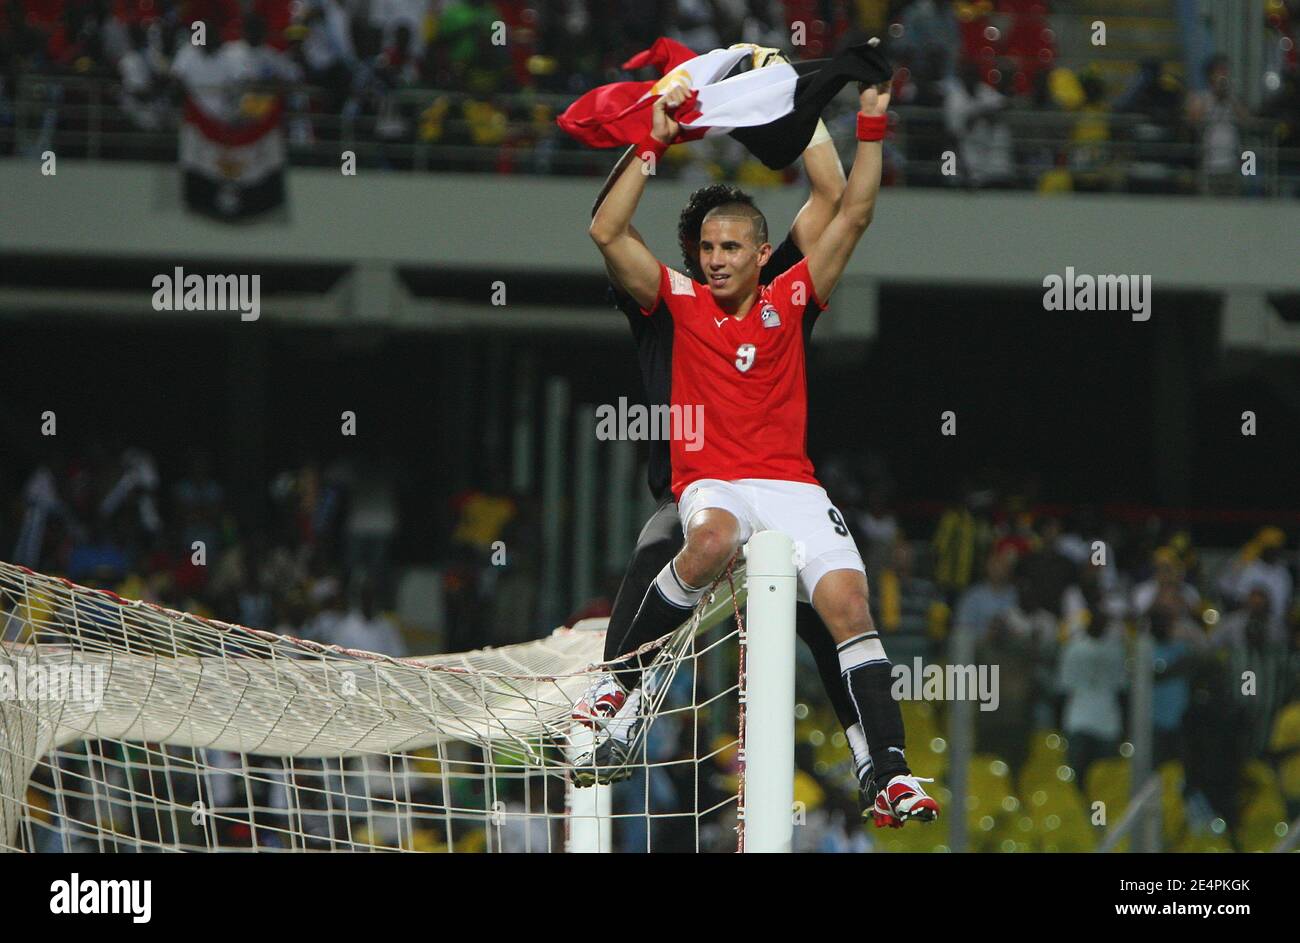 Egypt's Goalkeeper Esam Kamal Tawfik El Hadary and Mohamed Abdalla Mohamed Zidan celebrate during the Final of the 2008 African Cup of Nations soccer tournament, Cameroon vs Egypt in Accra, Ghana on February 10, 2008. Egypt won the match 1-0. Photo by Steeve McMay/Cameleon/ABACAPRESS.COM Stock Photo